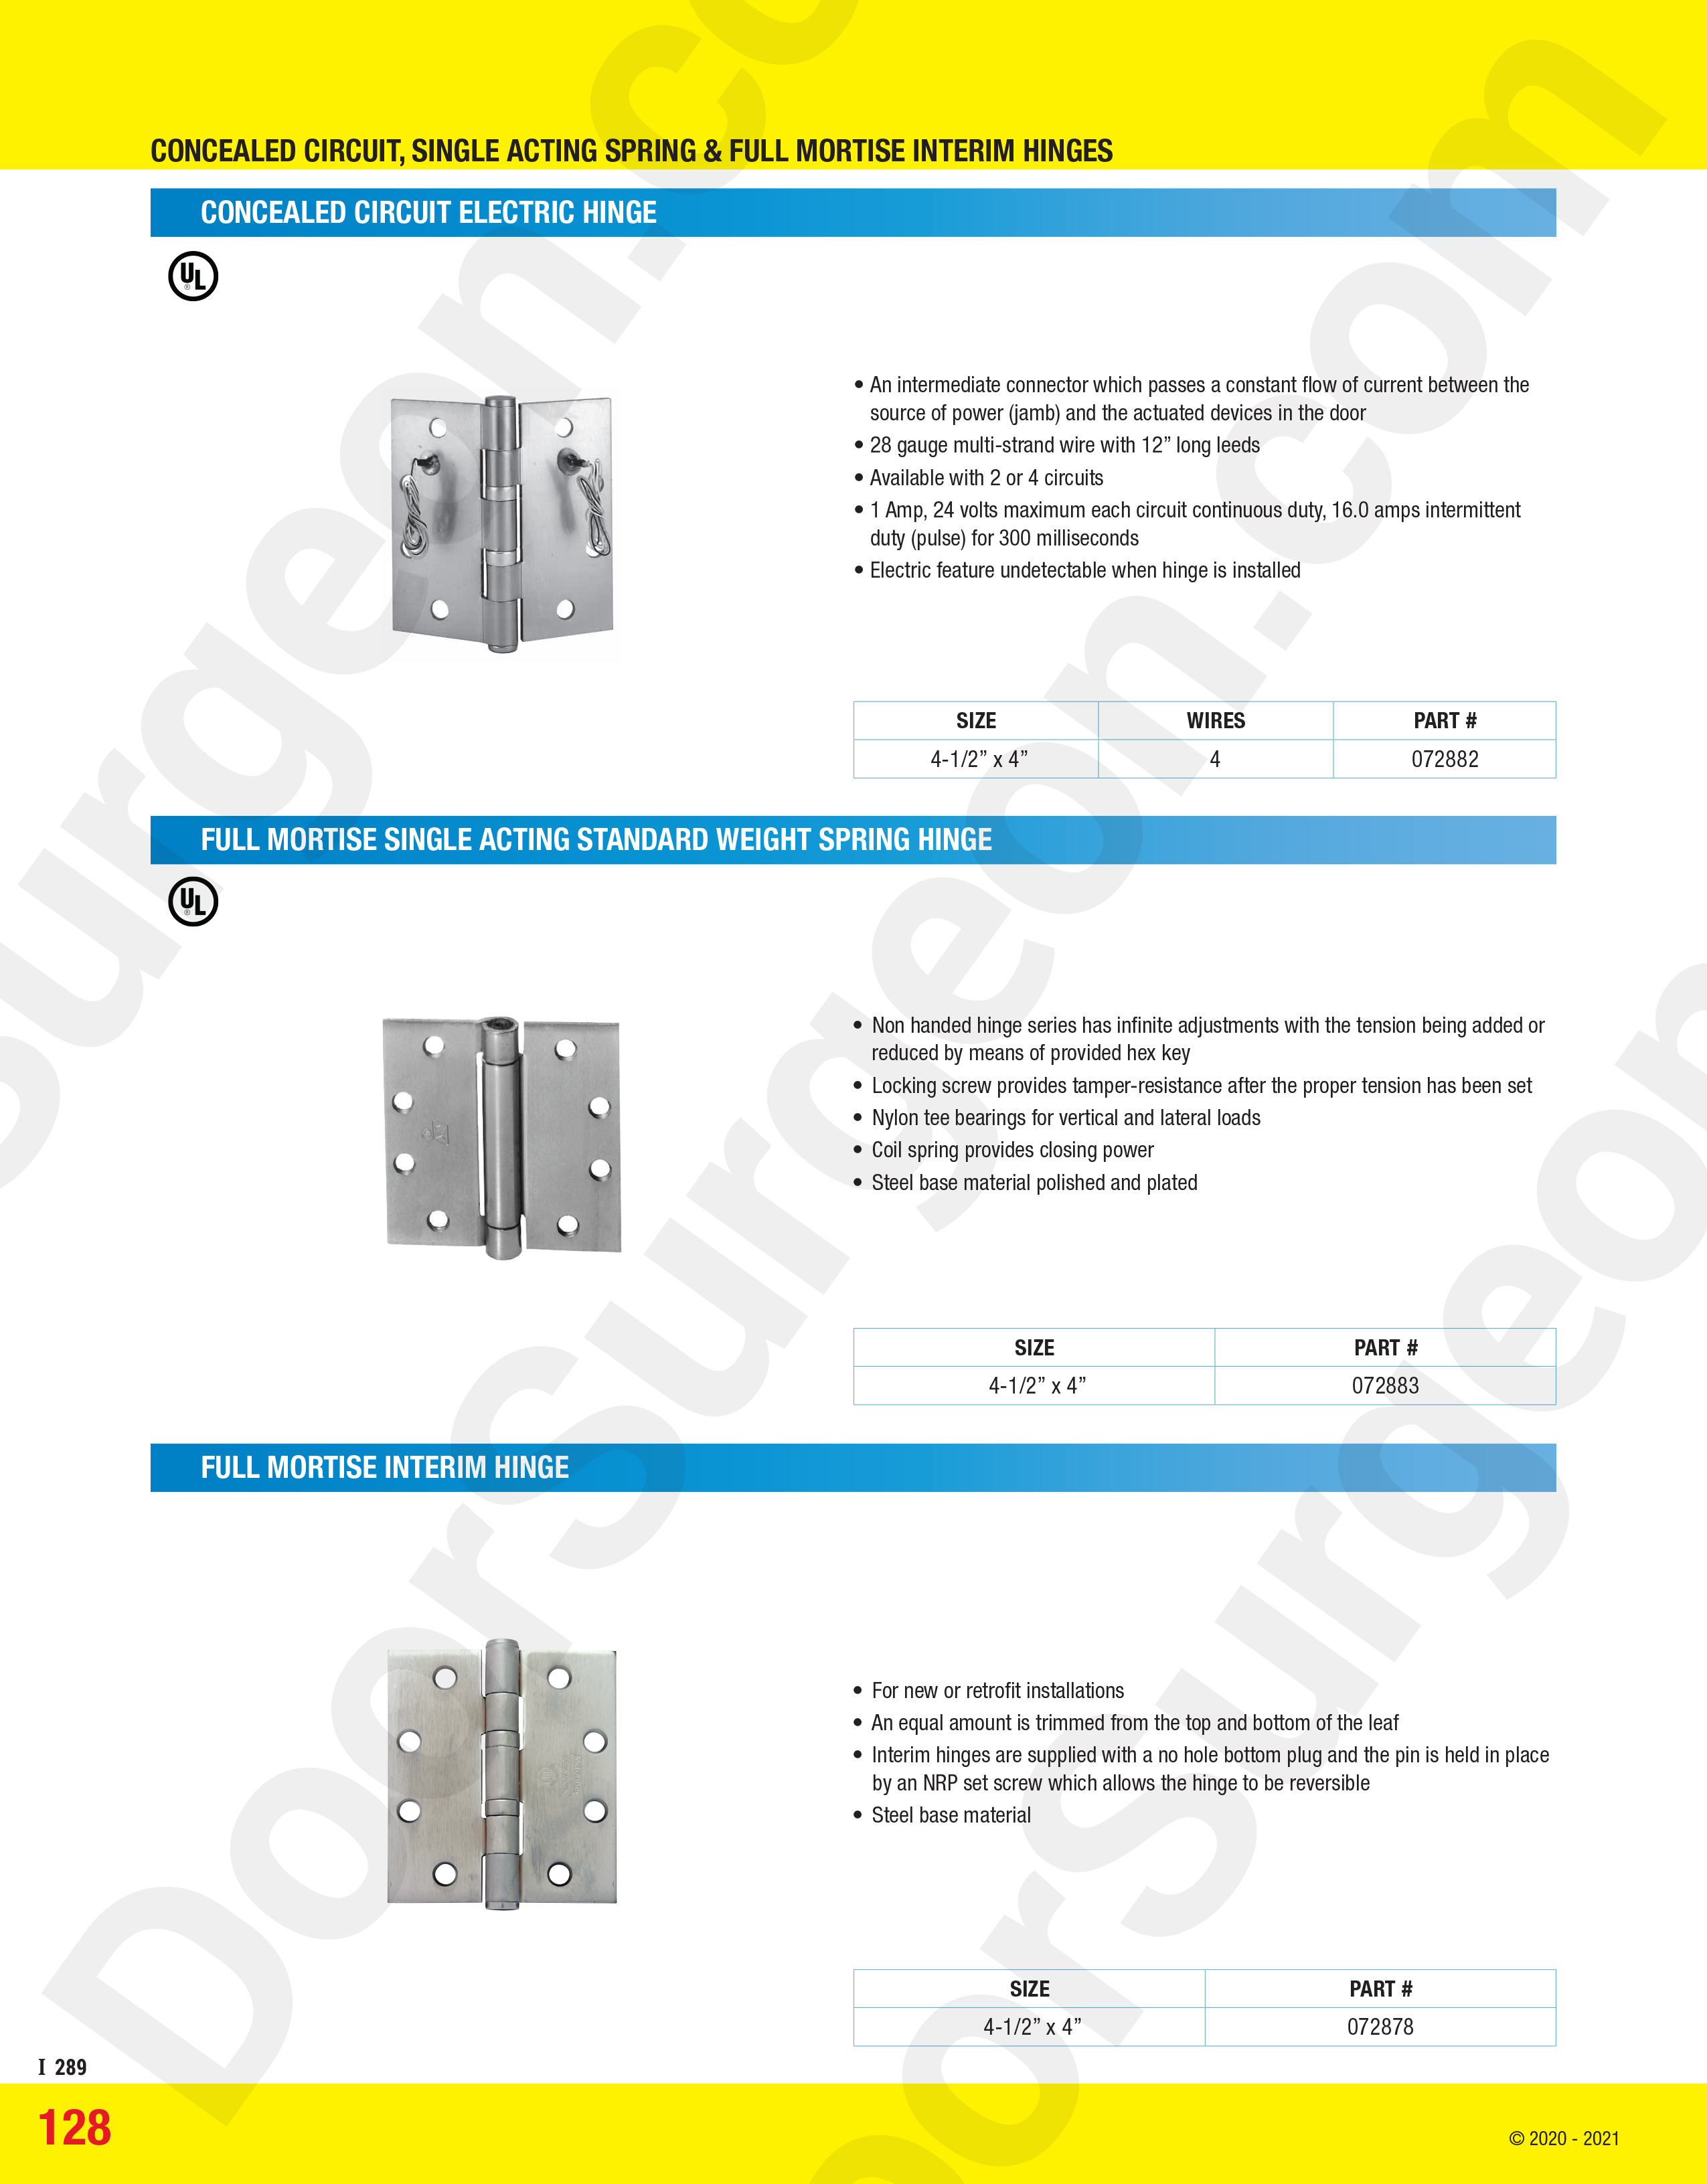 Concealed circuit single-acting spring and full mortise interim hinges.